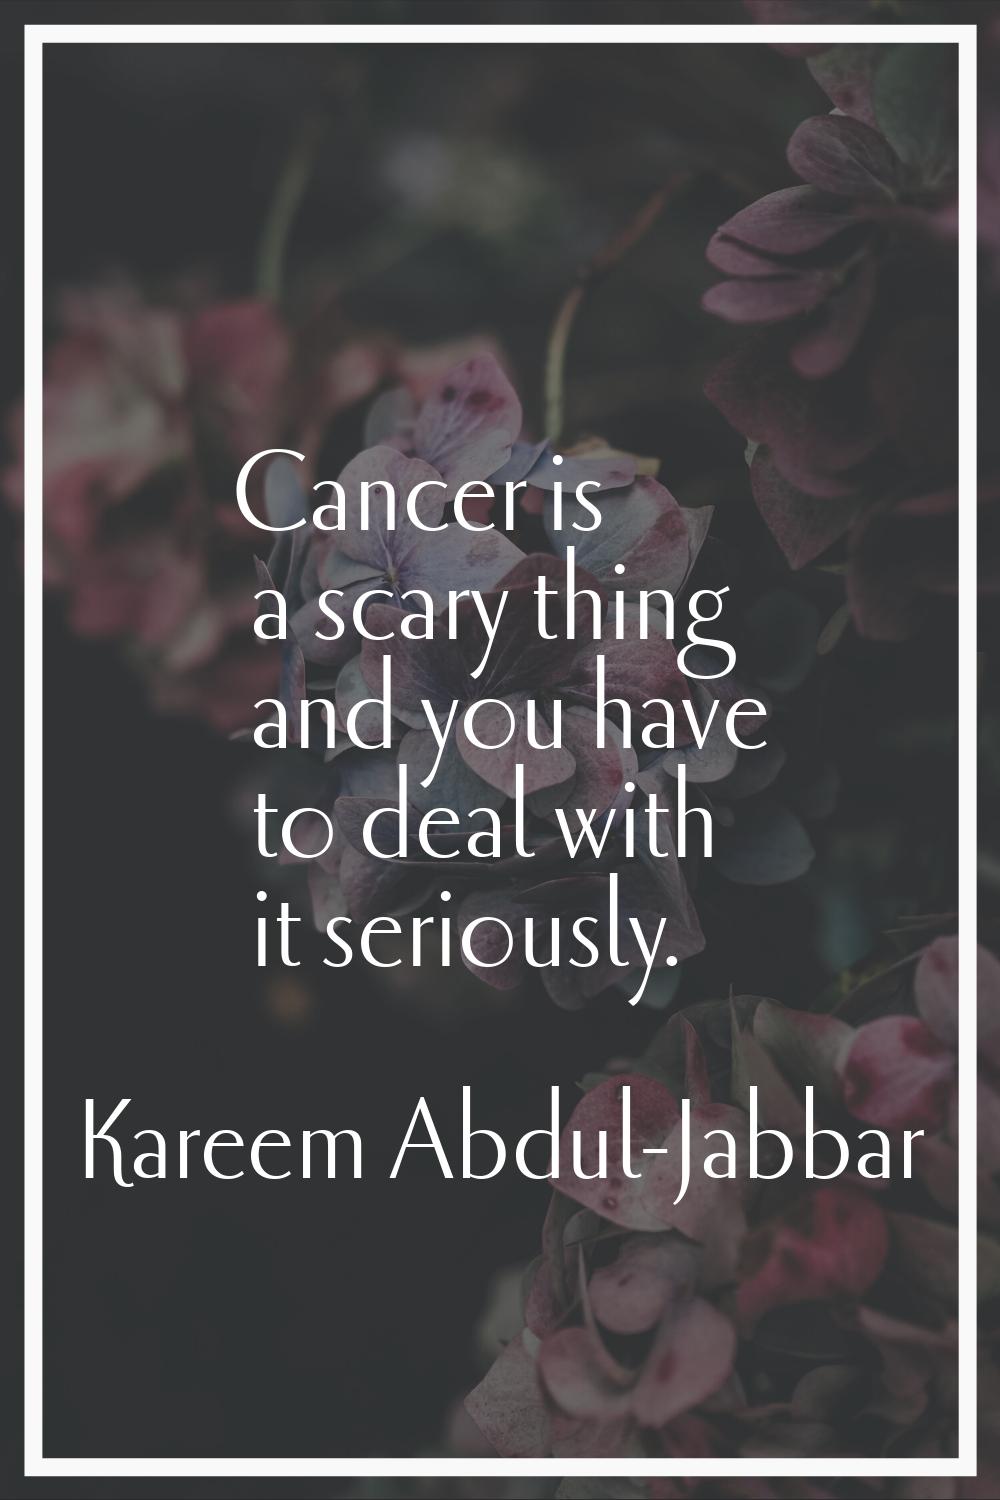 Cancer is a scary thing and you have to deal with it seriously.